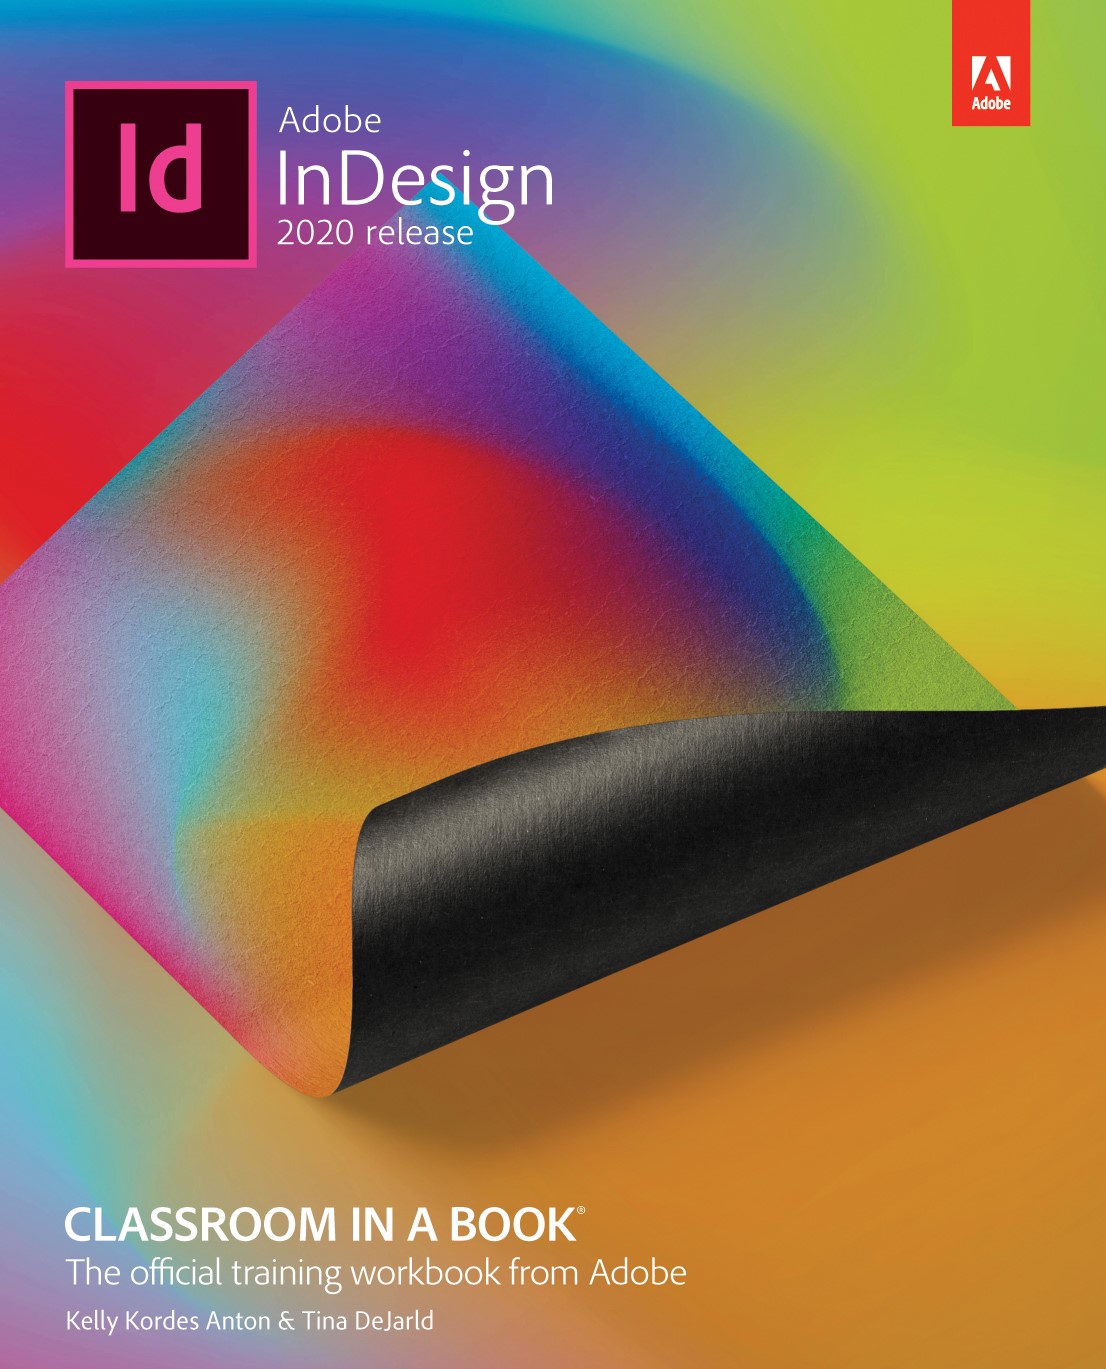 Adobe InDesign Classroom in a Book (2020 release)